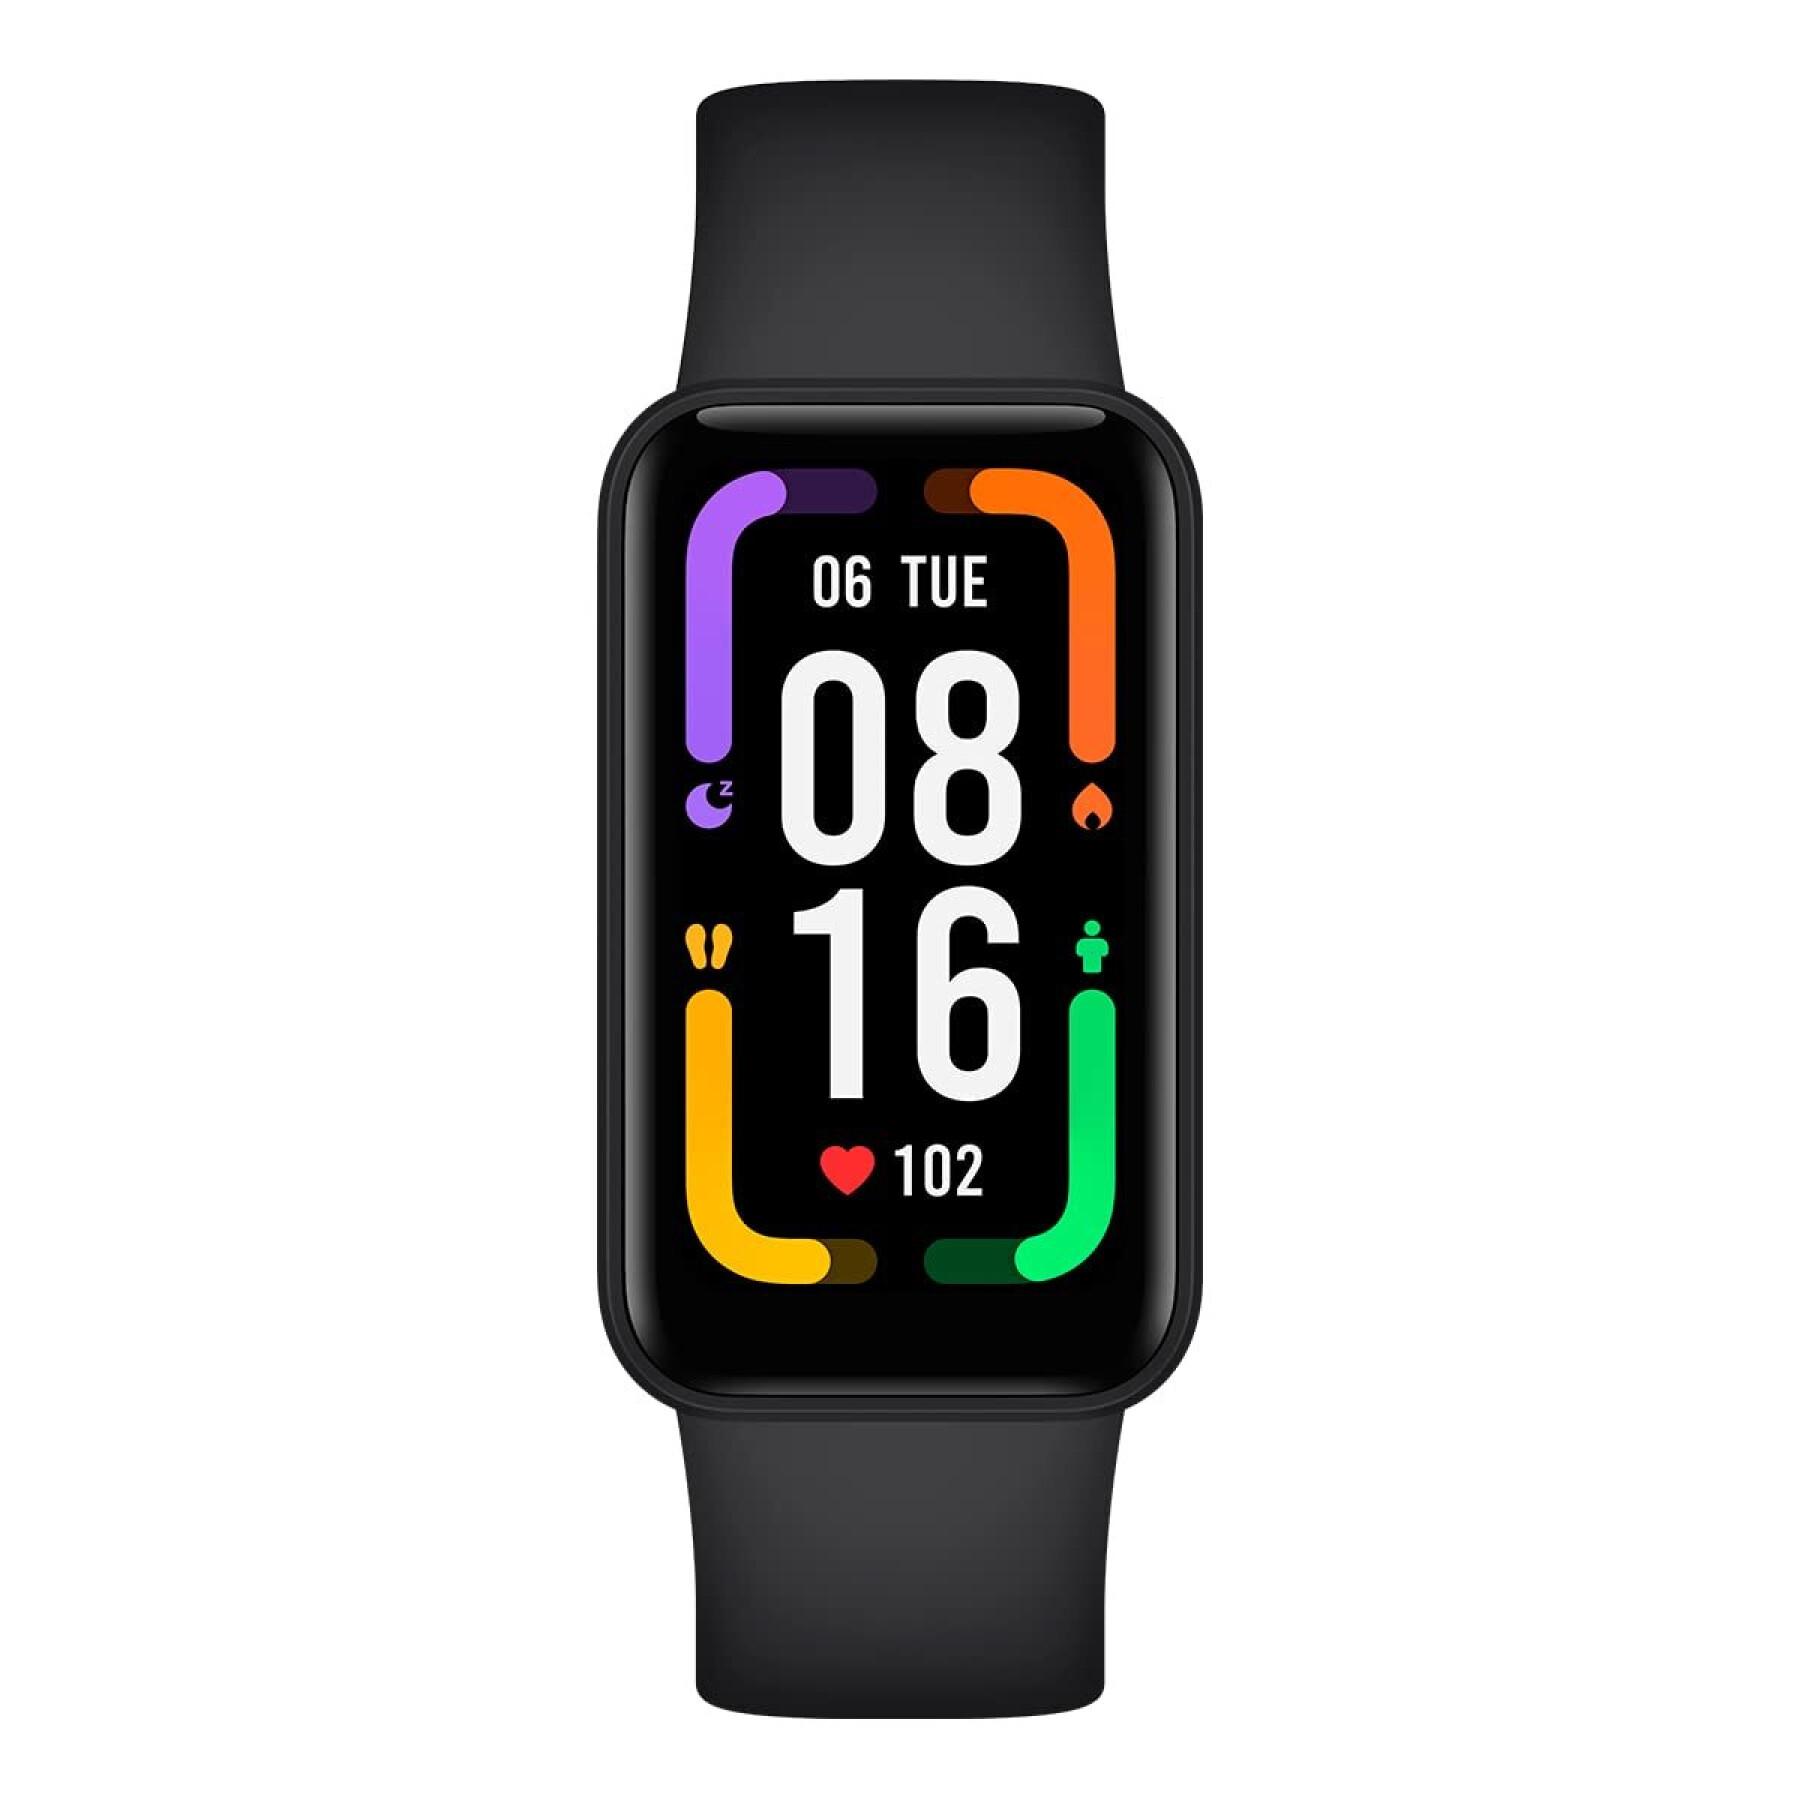 Connected watch Xiaomi Redmi Smart Band Pro